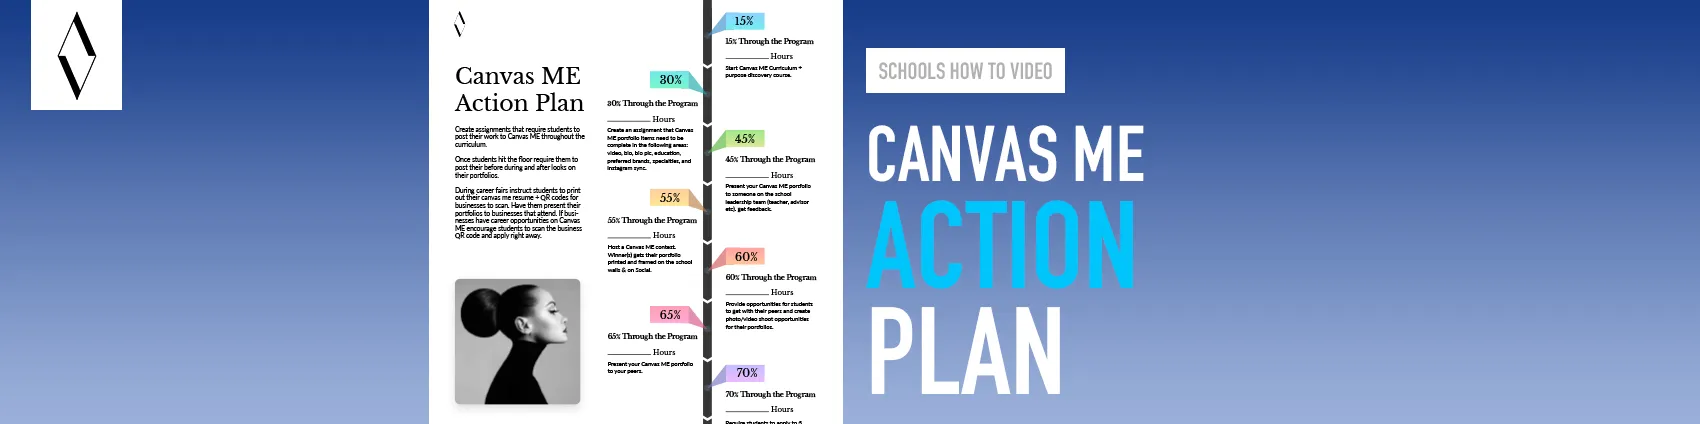 HOW CANVAS ME EMPOWERS YOUR SCHOOL: Canvas ME Action Plan